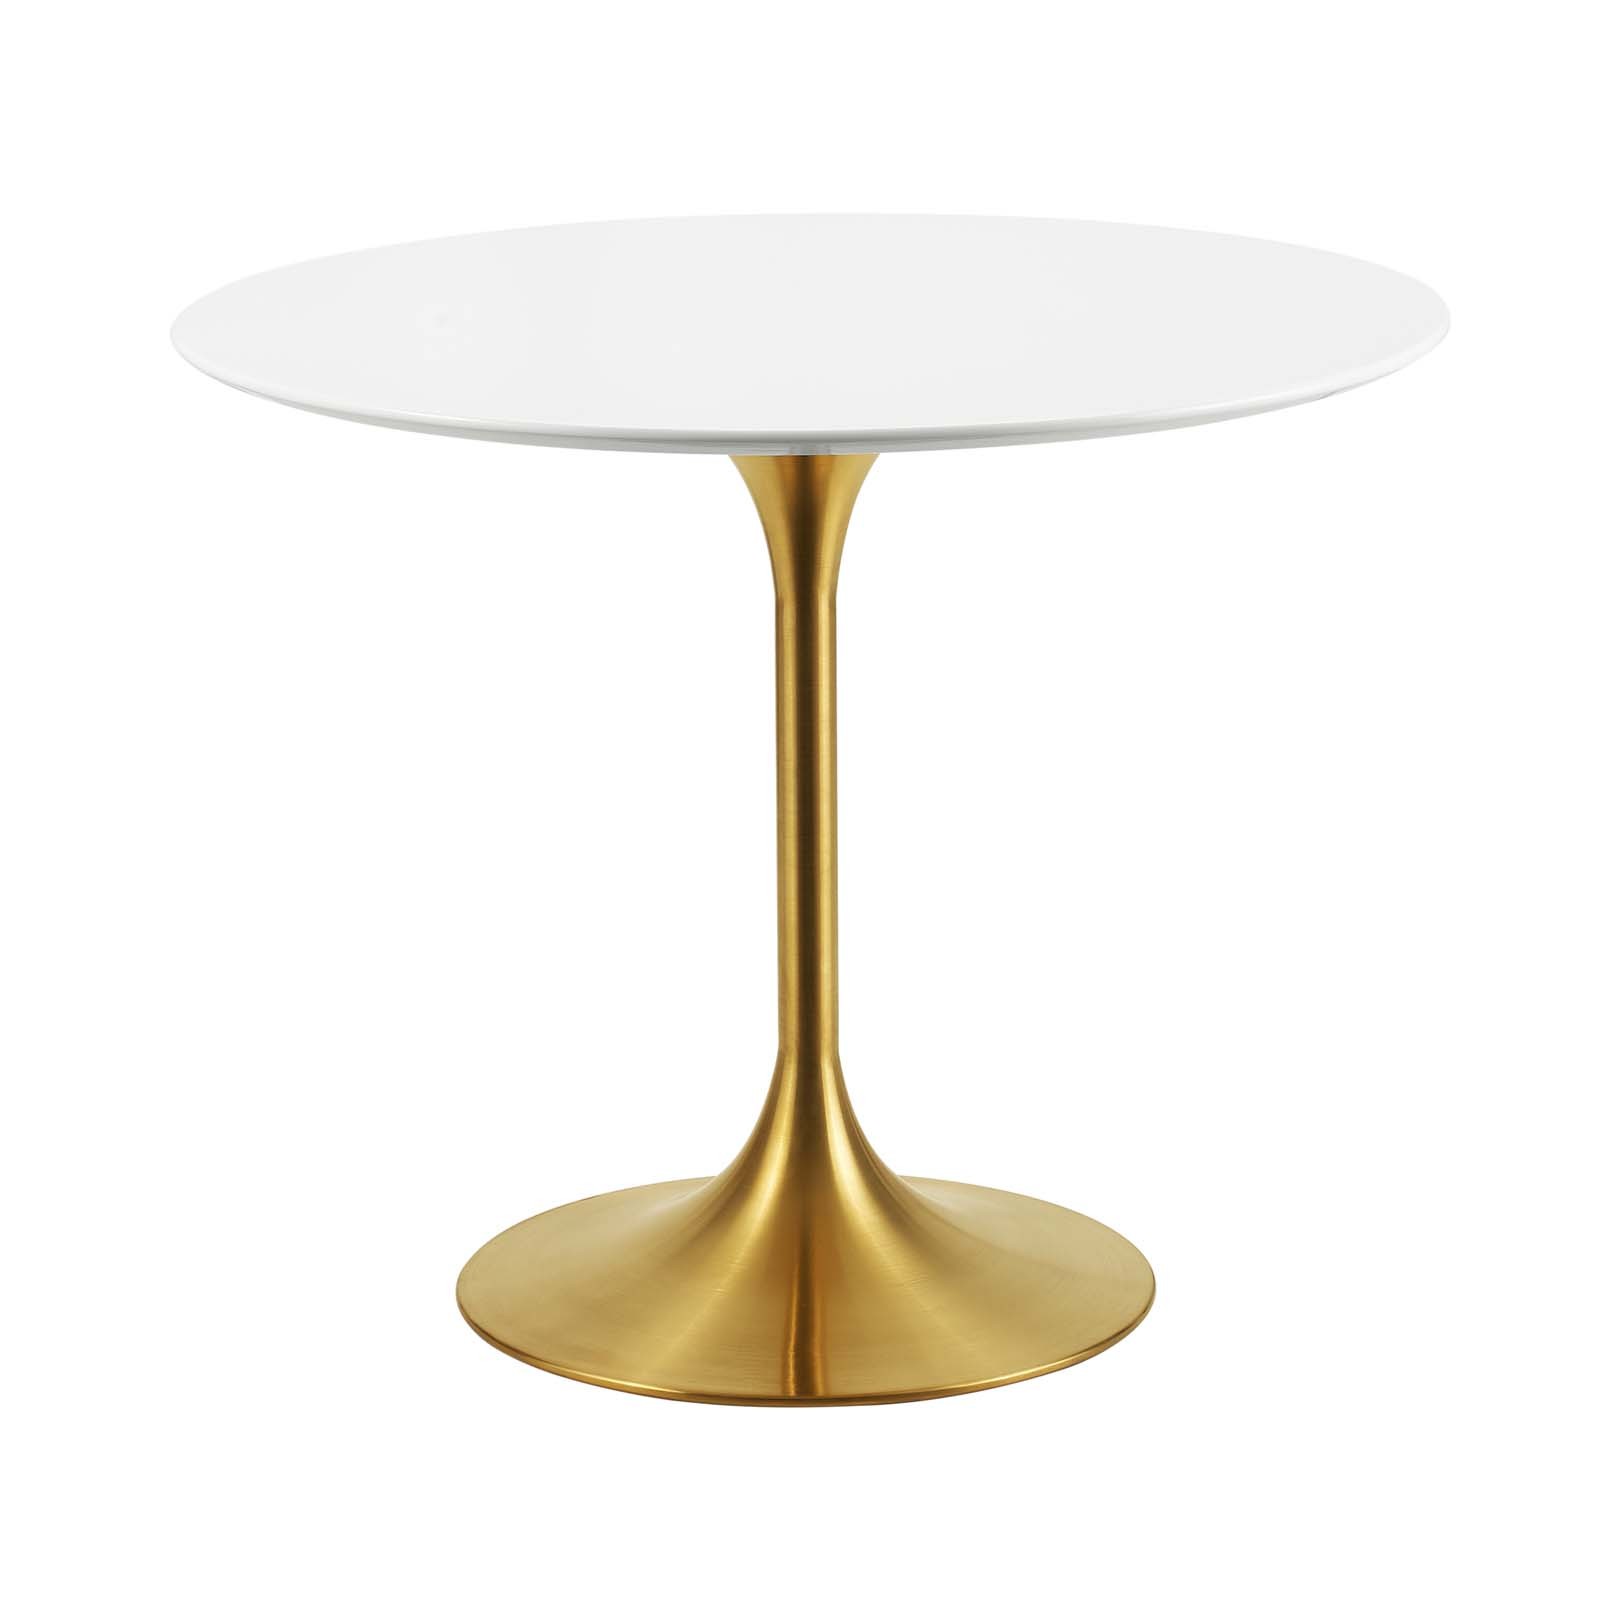 Lippa 36 Round Dining Table In Gold White, 36 Round Dining Tables